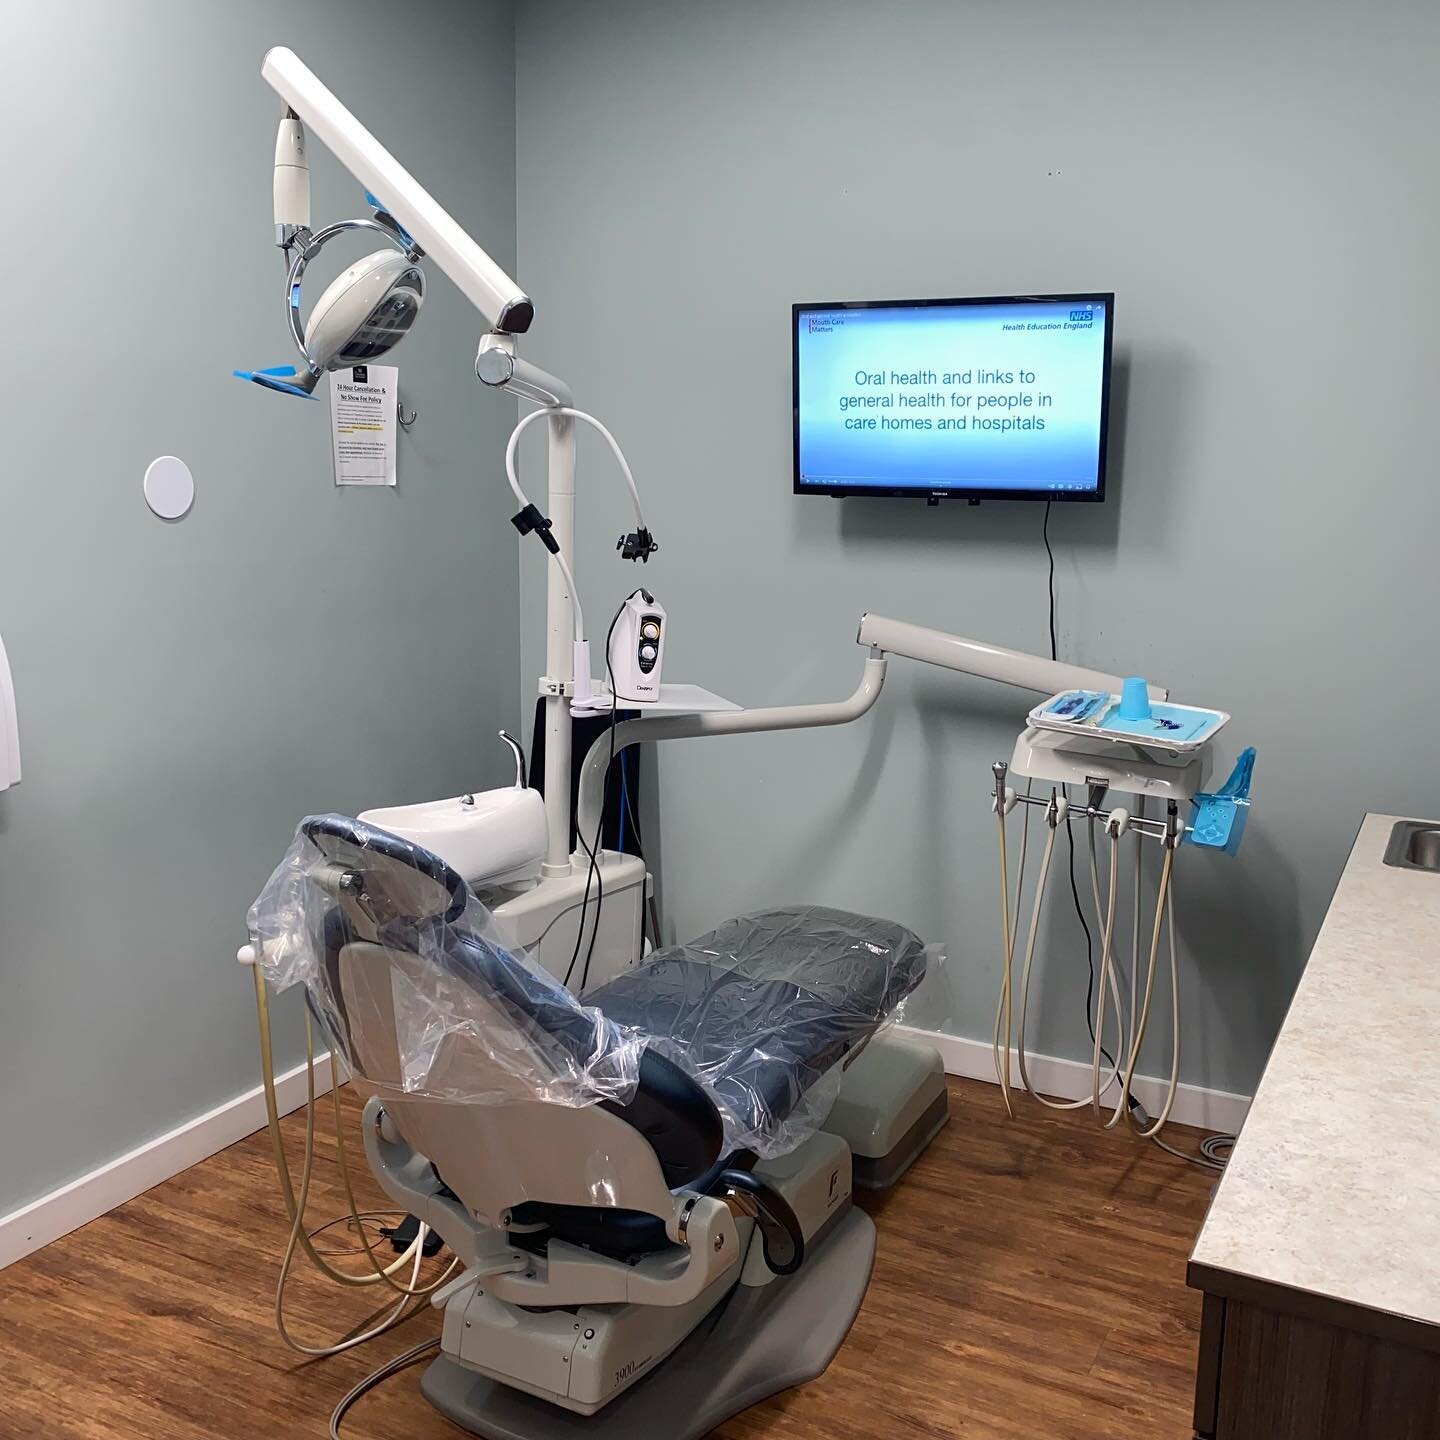 We now have a TV in our Dental Hygiene room❗️During your dental prophylaxis, you can now expect to see educational videos on oral hygiene and on improving dental health.
🦷
It is important to us, at 50 Commerce Dental, that each patient receives not 